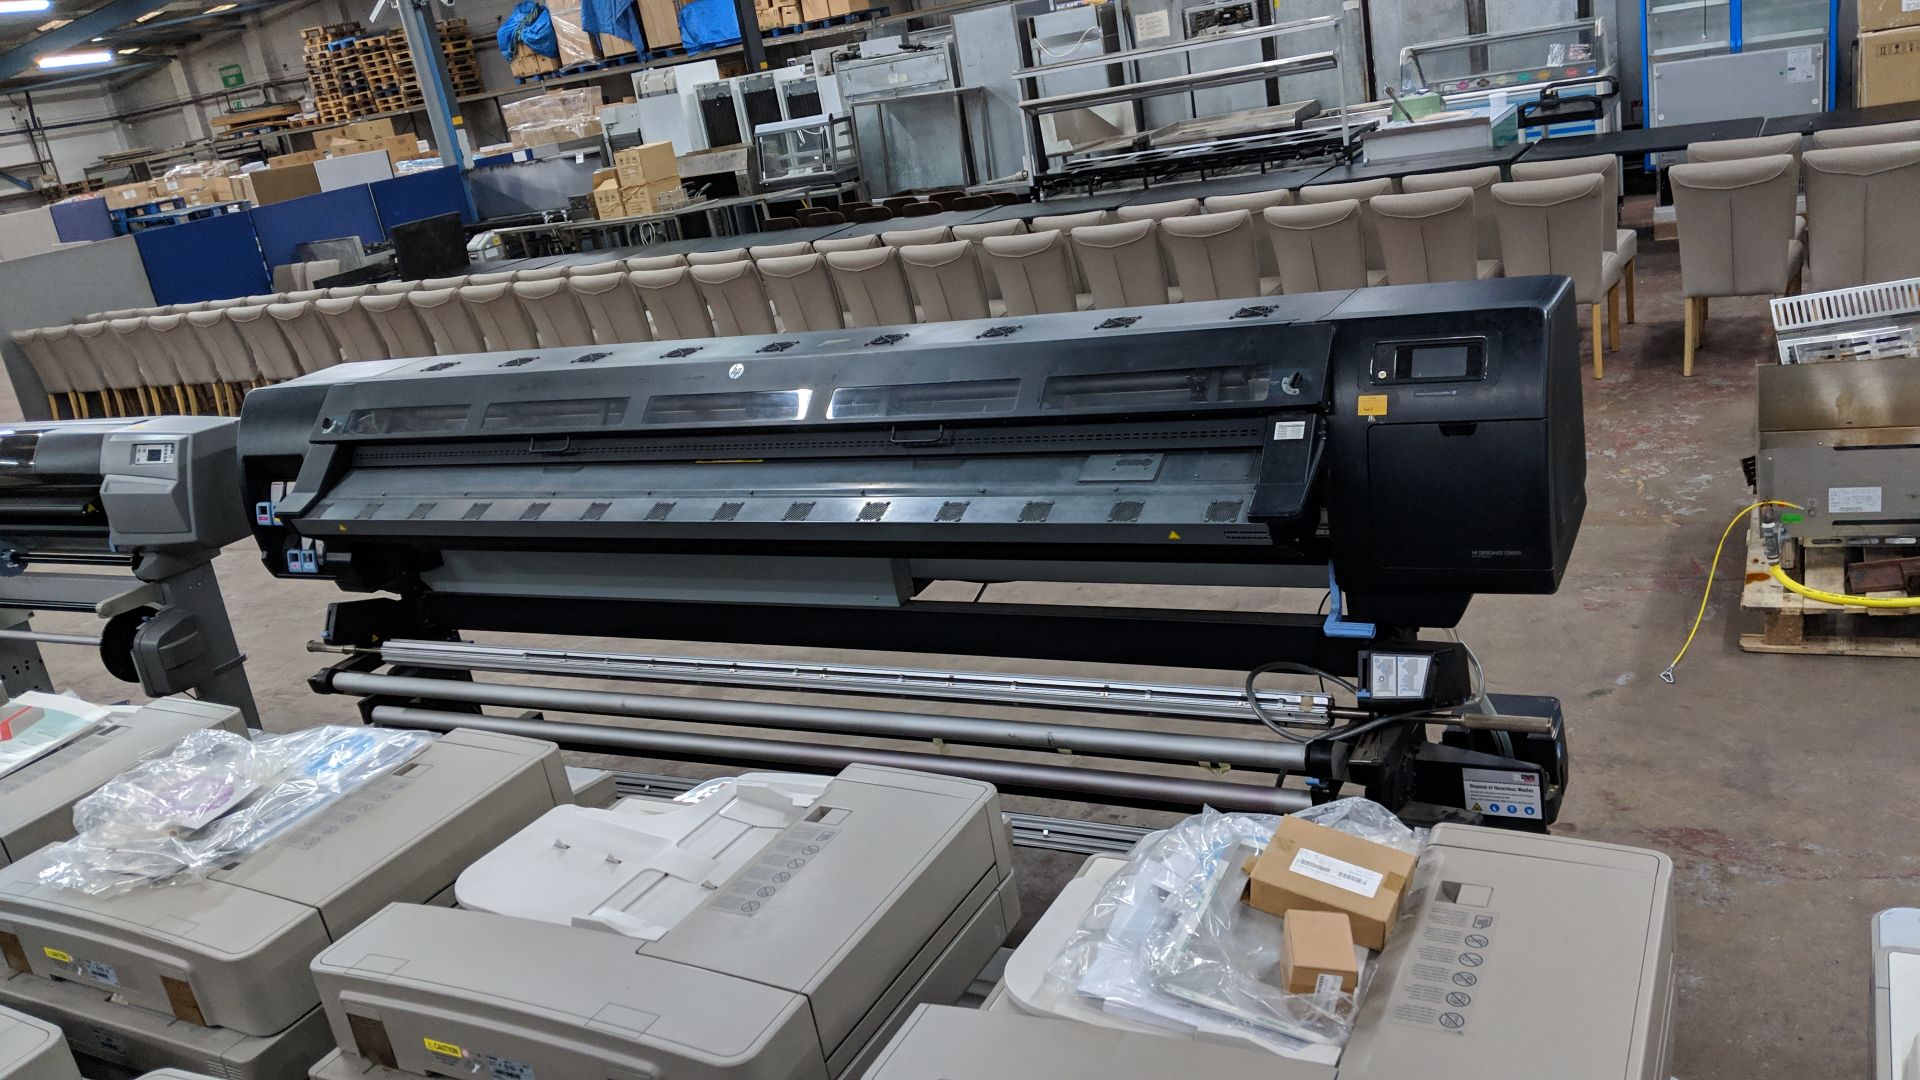 HP DesignJet L28500 latex 103.9" wide format printer, serial no. MY23F24009, product no. CQ871A - Image 12 of 12